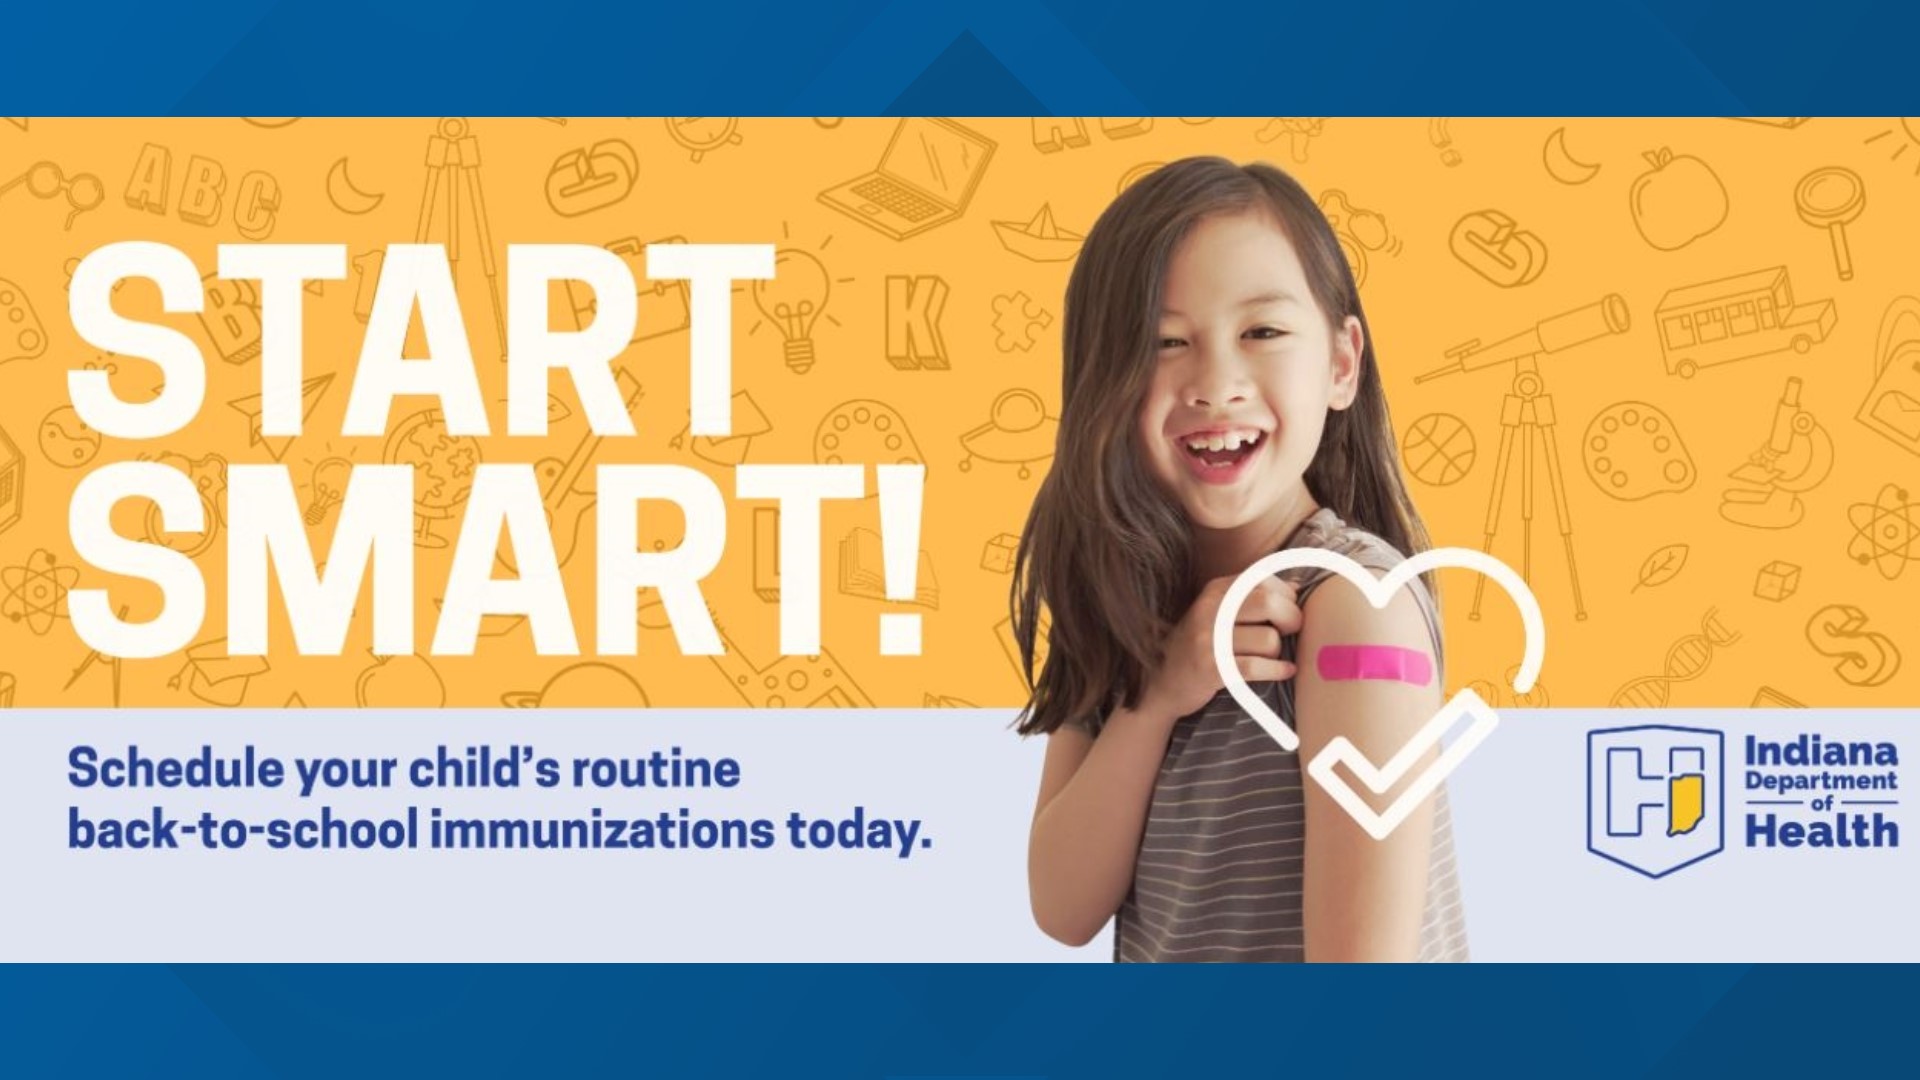 Indiana health leaders have launched a campaign called "Start Smart!" to make it easier for students to get required immunizations.